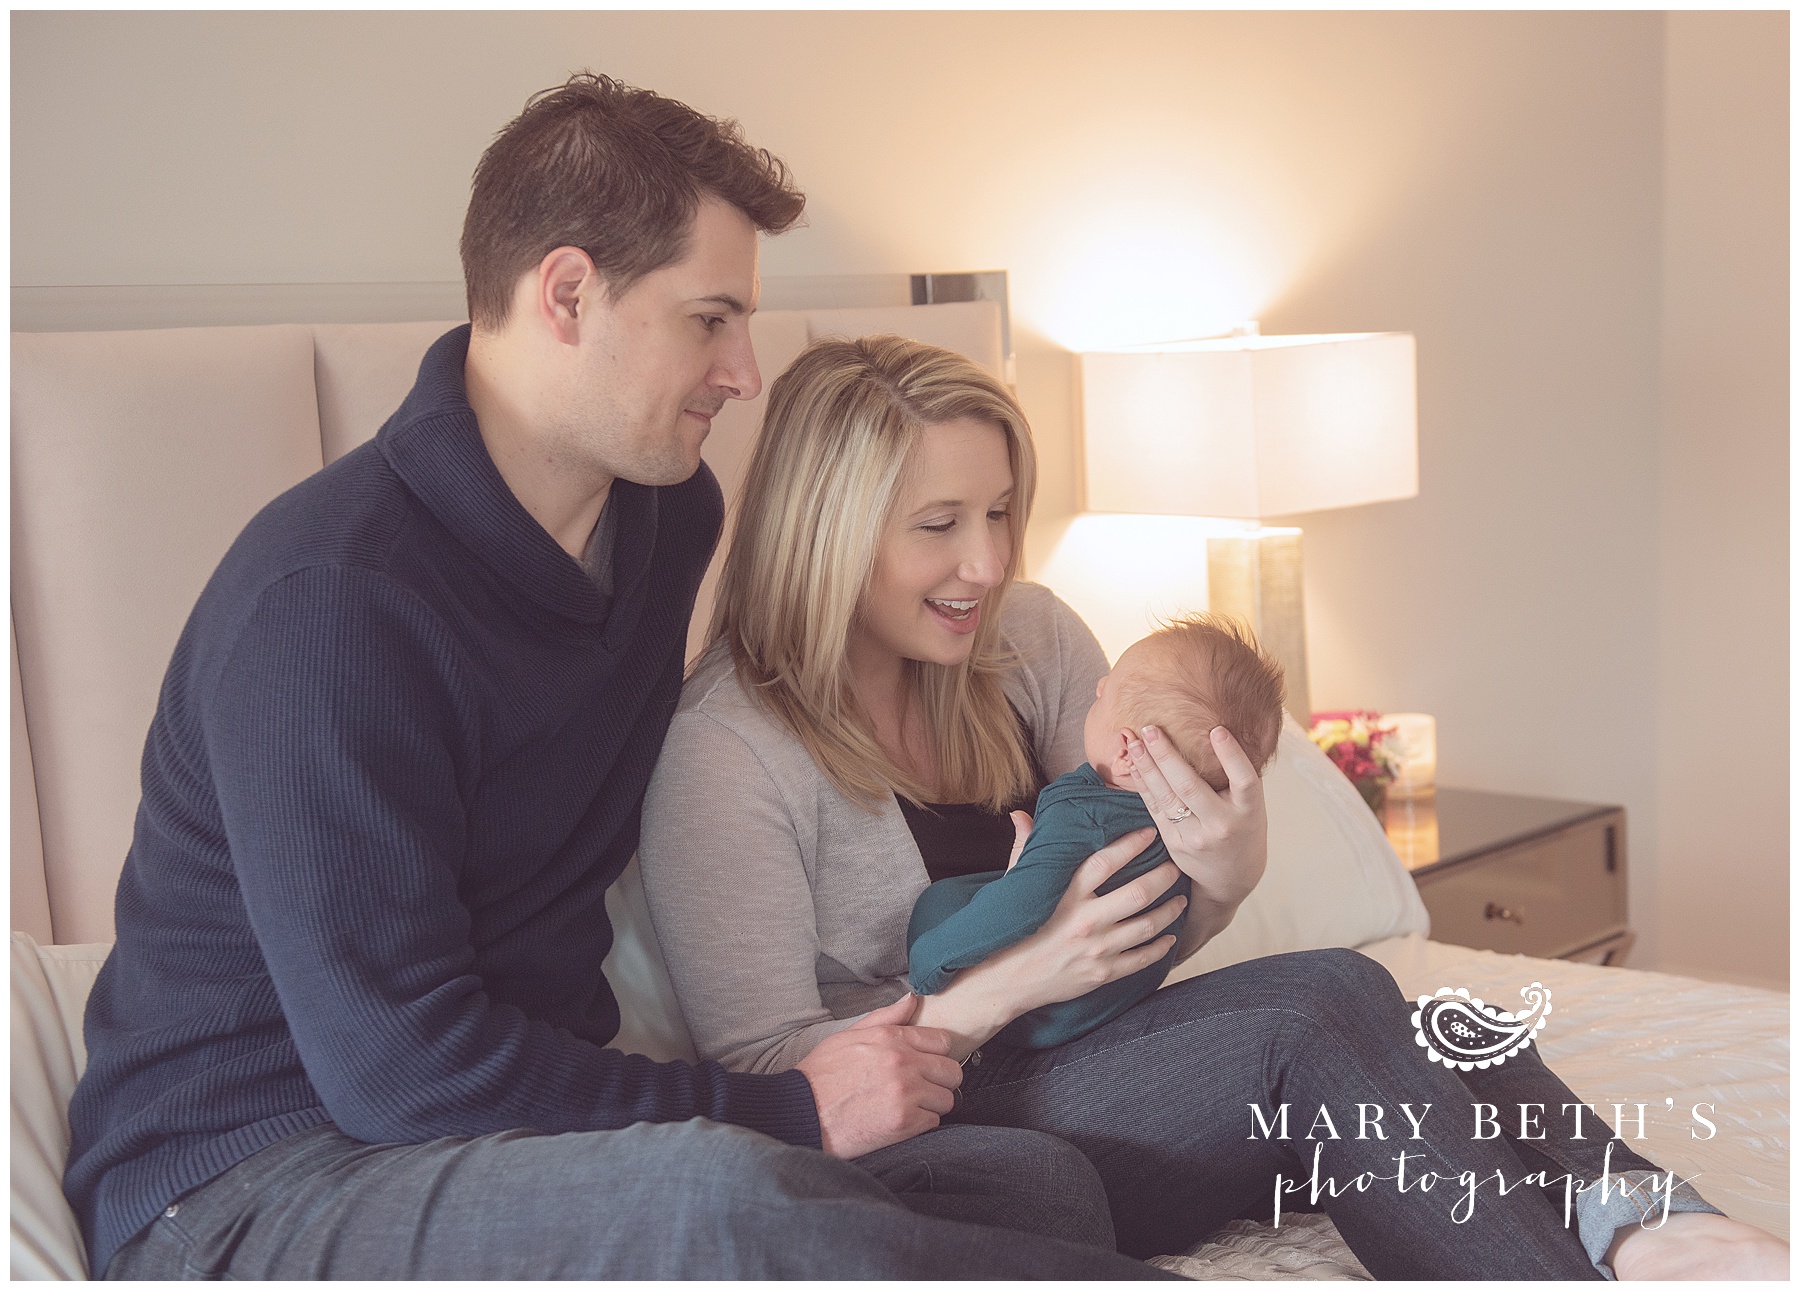 MaryBeths Photography - North Augusta Family and Newborn Session Photographer_0006.jpg